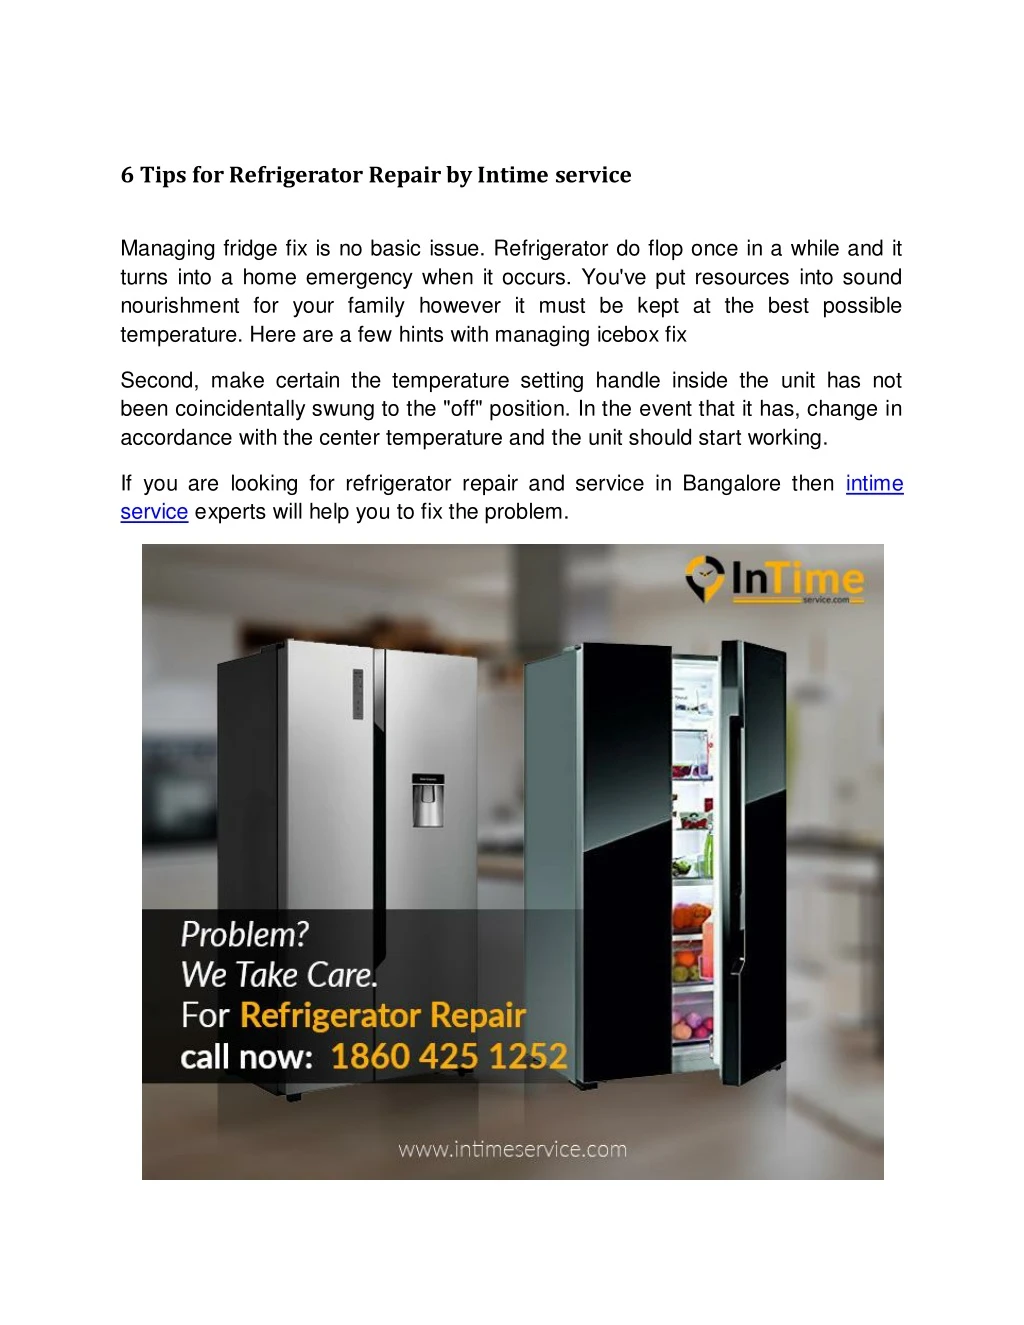 6 tips for refrigerator repair by intime service